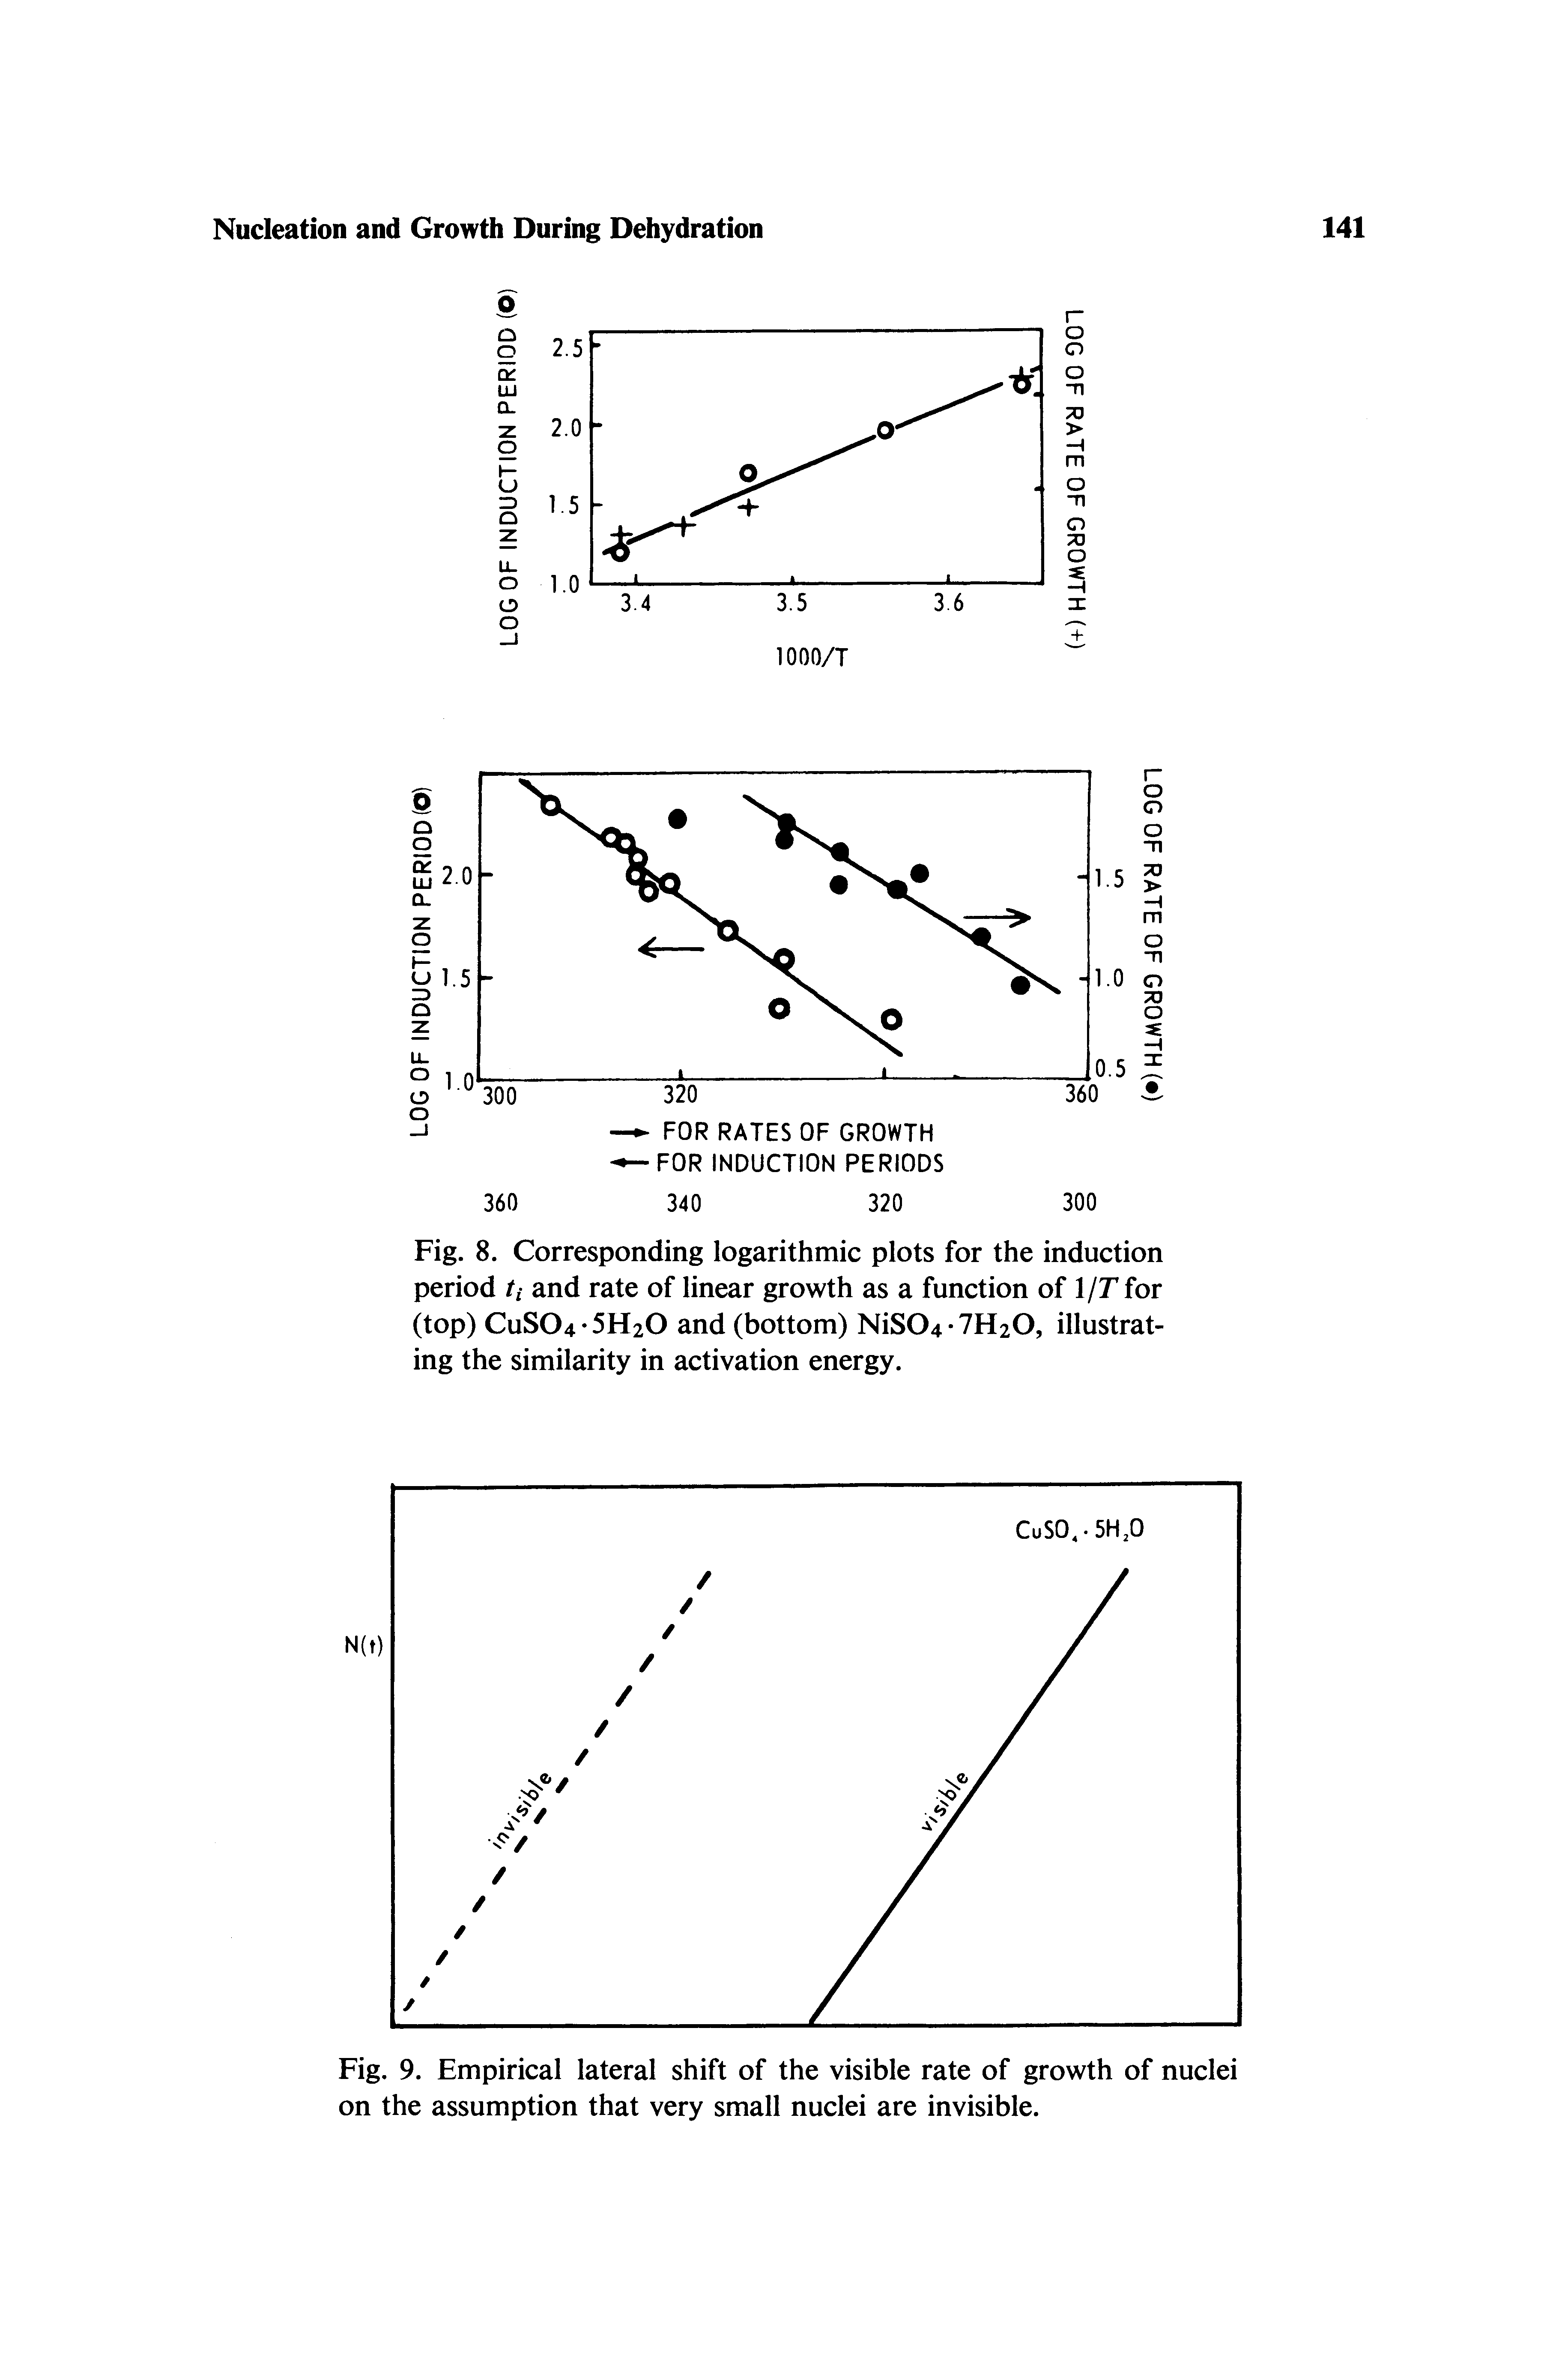 Fig. 8. Corresponding logarithmic plots for the induction period ti and rate of linear growth as a function of l/Ffor (top) CuS04 5H20 and (bottom) NiS04-7H20, illustrating the similarity in activation energy.